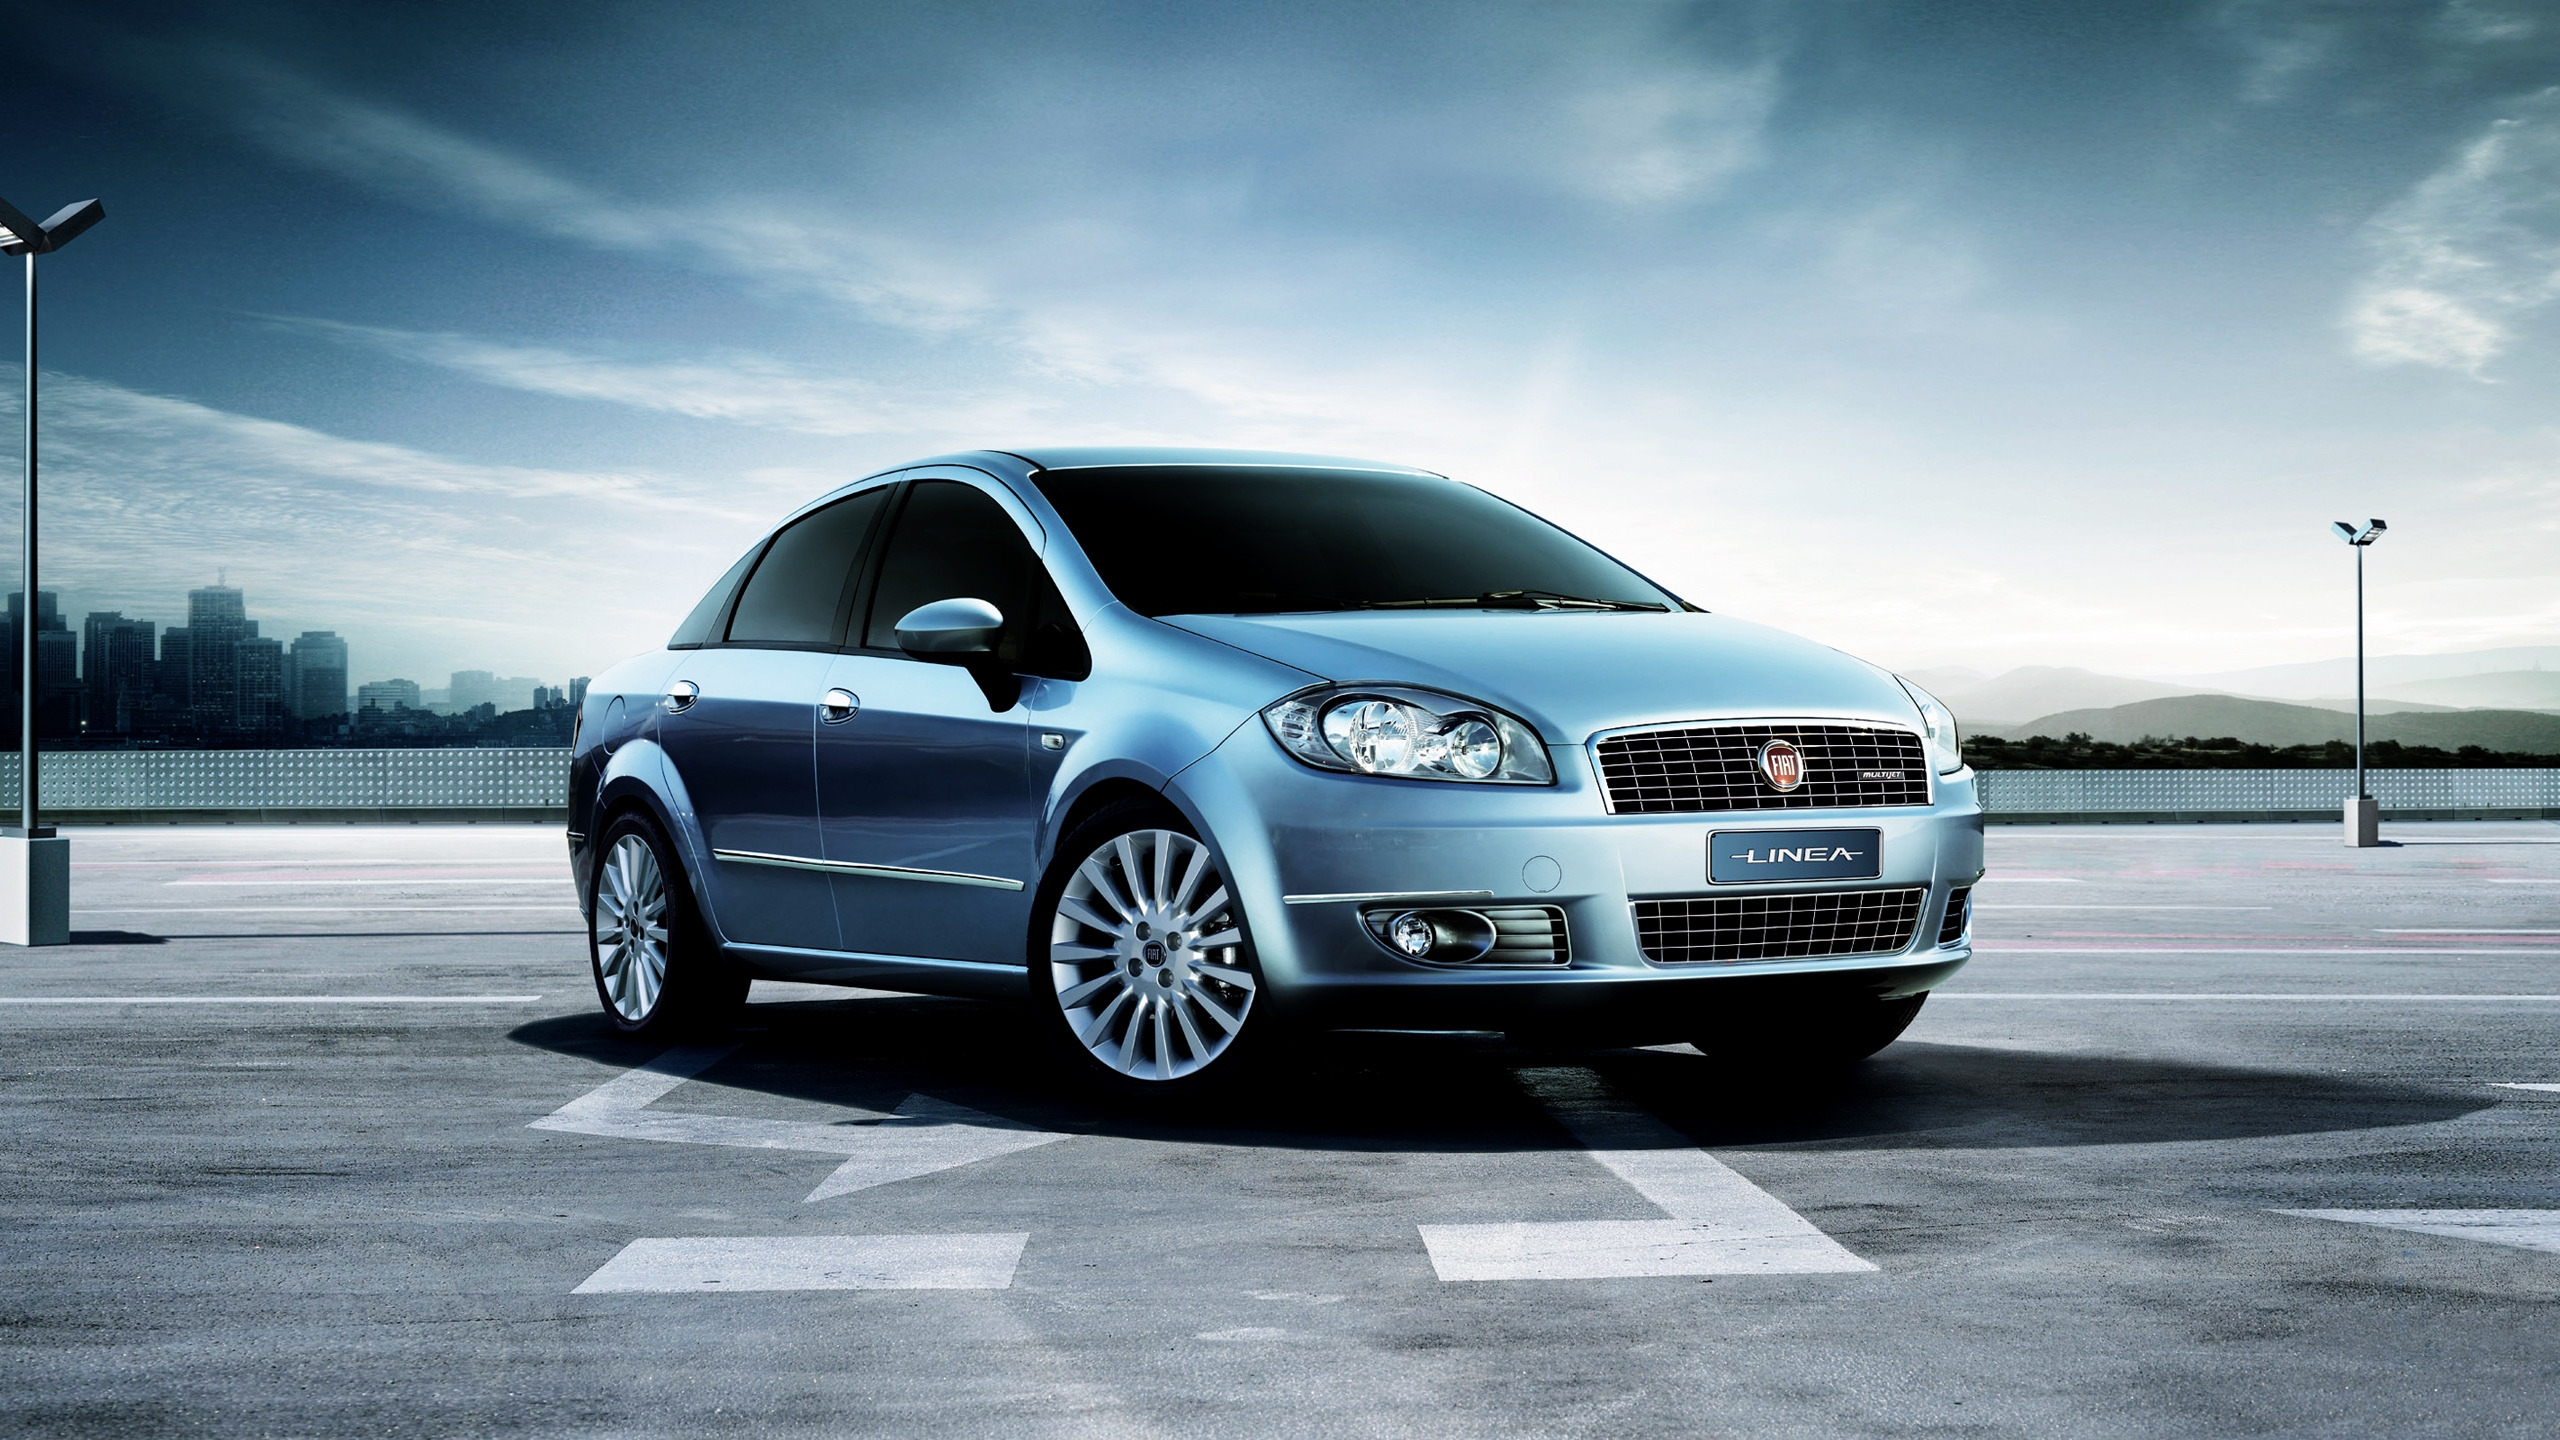 Fiat Linea 2009 for 2560x1440 HDTV resolution